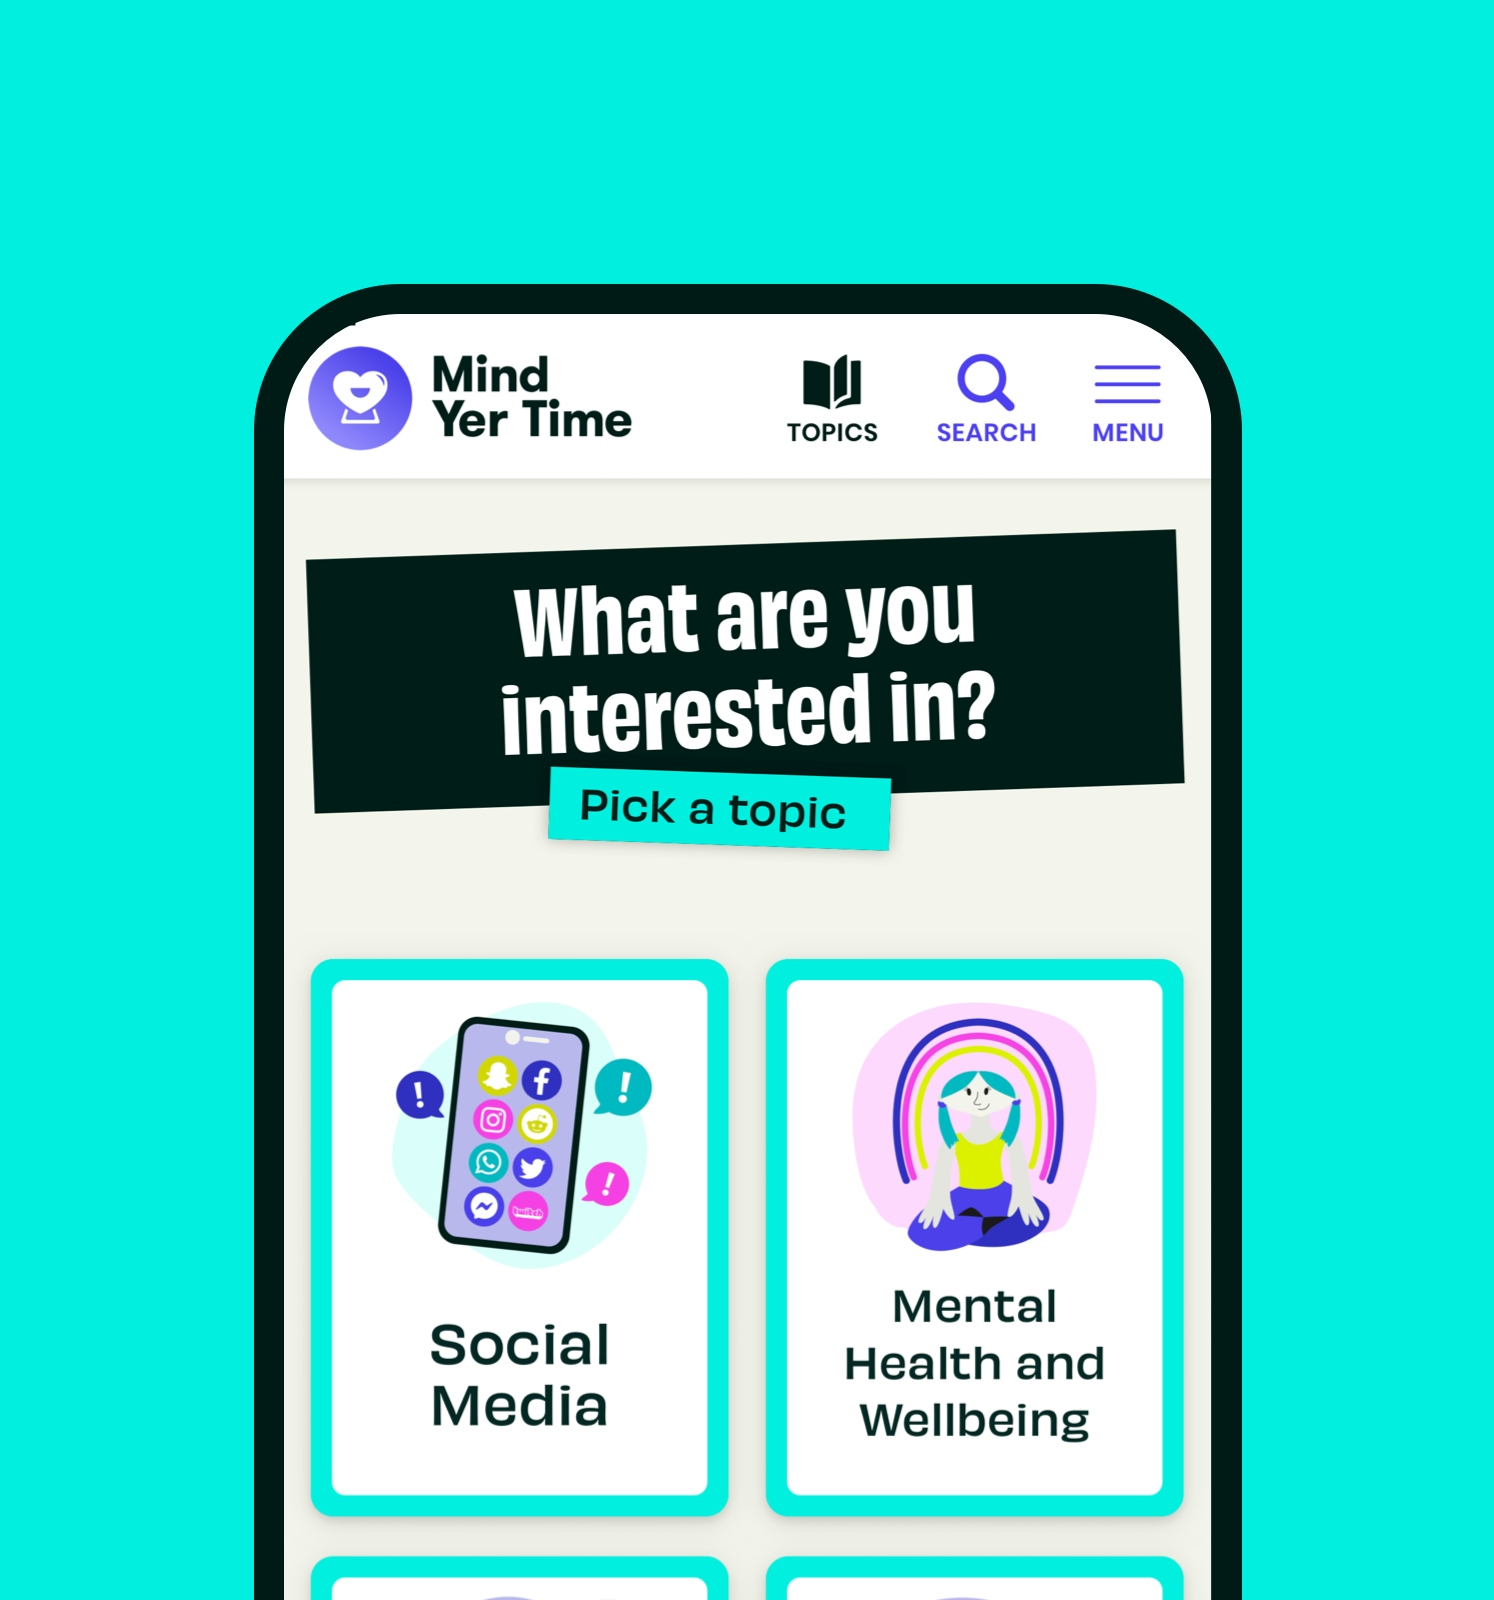 A mobile phone depicts a screenshot of the Mind yer Time page “What are you interested in?”on a turquoise blue background